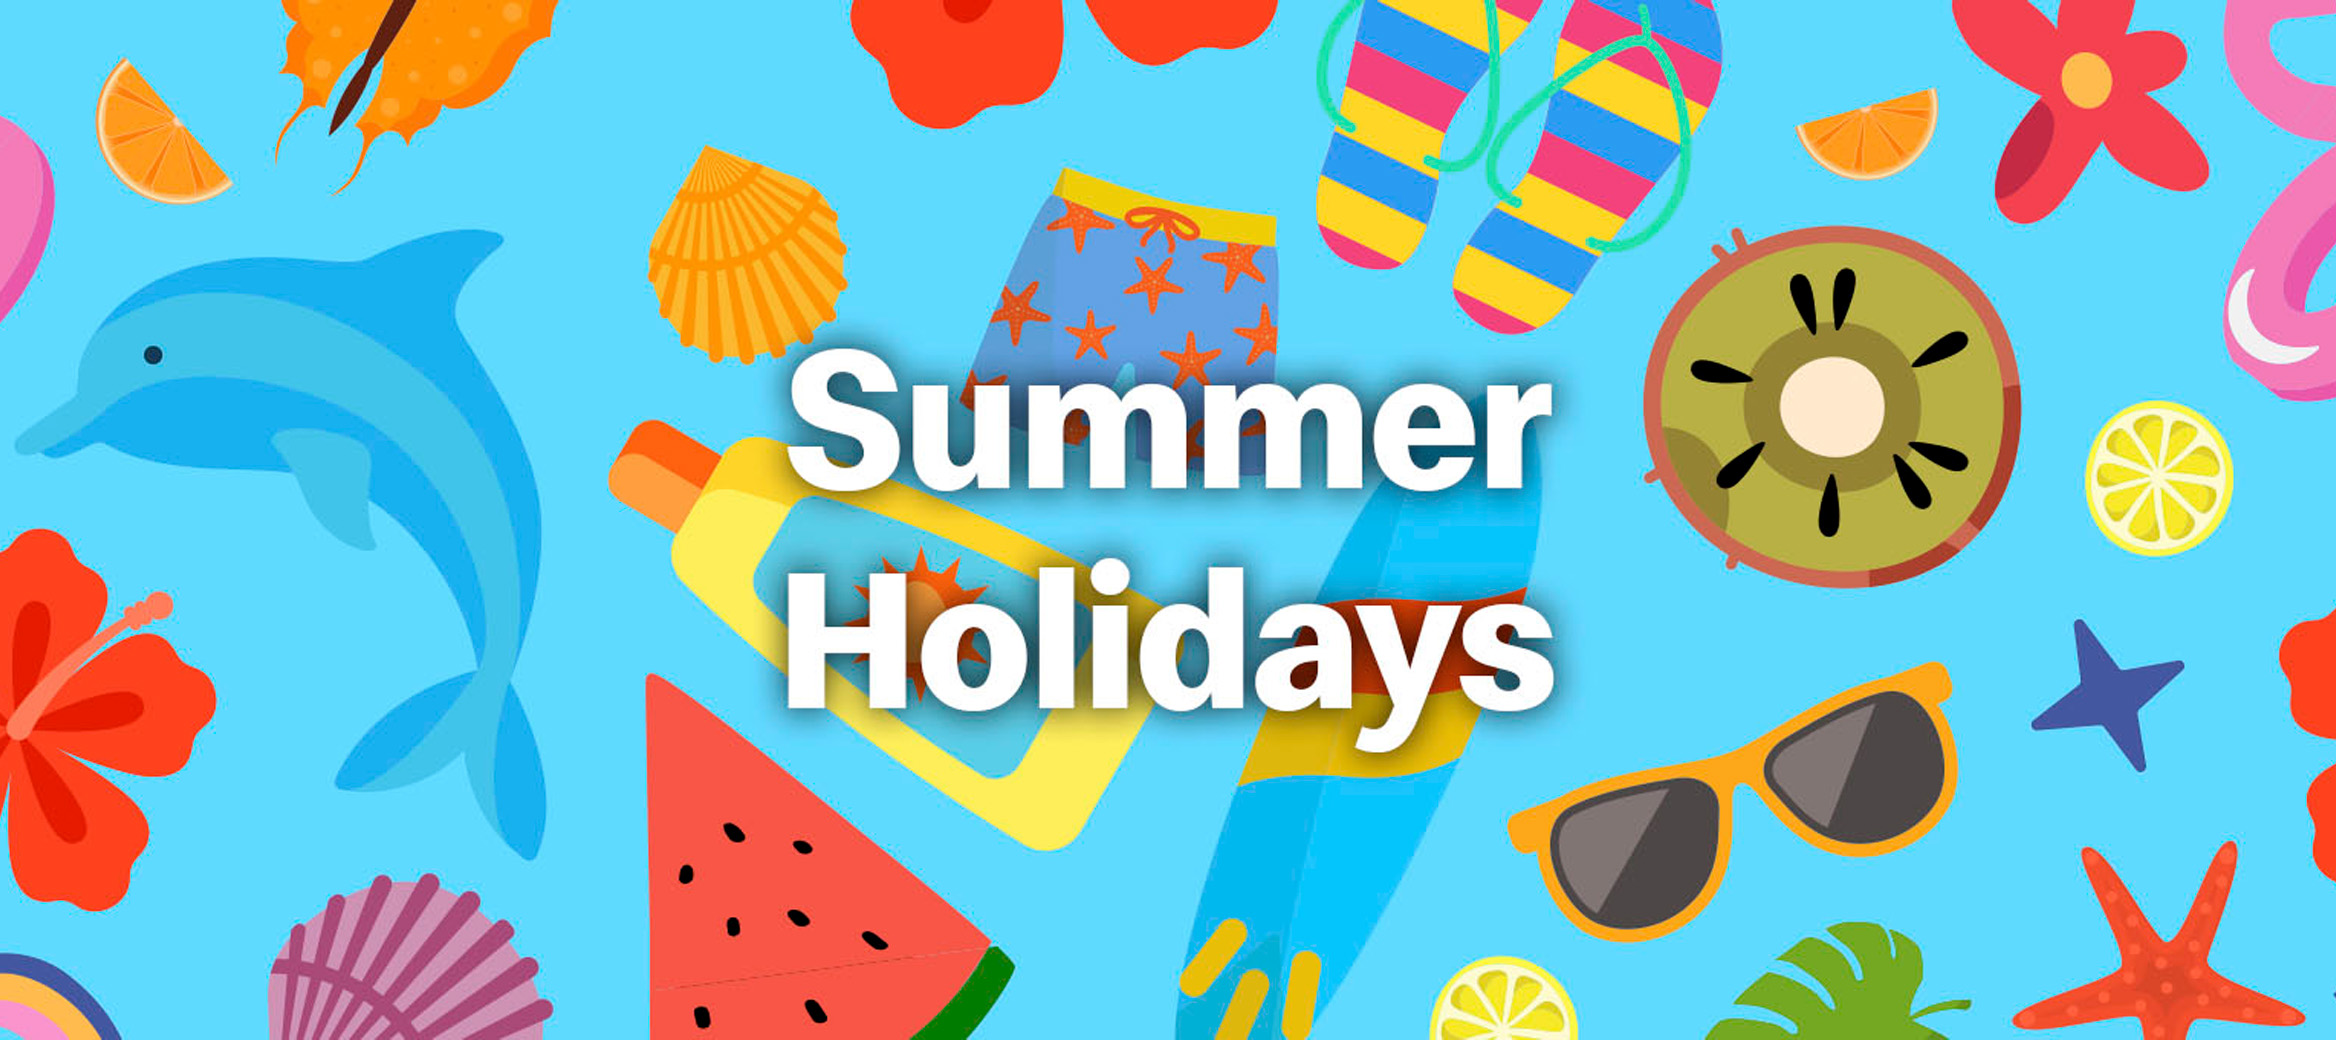  From park mazes to designing their own sandcastle, there are plenty of activities to keep your little one entertained this summer!